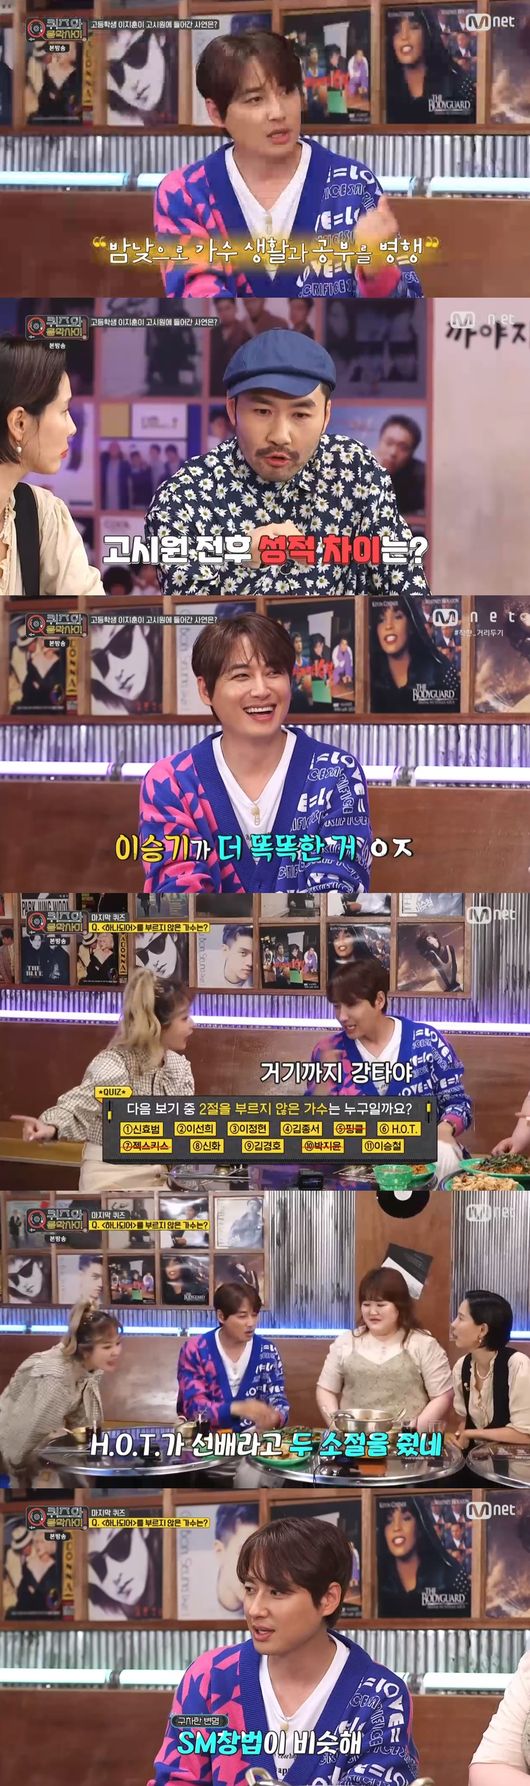 Lee Ji-hoon has appeared as the last guest between Queess and MusicOn Mnet Quiz and Music broadcast on the 2nd, Lee Ji-hoon appeared as the last guest, and Shin Ji showed tears.The first menu on the day was Cheong-myeon. If you answer the correct answer, you will eat spicy chewy noodles, and if you are wrong, you will eat hells taste chewy noodles.The first quiz featured Jang Na-ras Sweet Dream, which was to pick a celebrity with a different age than Jang Na-ra.But Jang Na-ra was the same age as Shin Ji and Kim Na-young.Shin Ji and Kim Na-young confidently said of the candidates, Baseball player Choo Shin-soo is younger than me.As a result, I ended up eating Noh Hong-chuls taste of hell.Noh Hong-chul said, I thought it would be very spicy but its too salty, making the surroundings Super fun.The second menu was Tea-su-yuk. The second quiz was Lee Seung-gis Its My Girl.Noh Hong-chul said, Ji Hoon is called Top Goal Lee Seung-gi these days. Shin Ji said, This song is a song written and composed by Psys brother.Shi Chongguis quiz was to hit a partner Lee Seung-gi, a junior high school senior, had a crush on.Shin Ji found a cross necklace in Lee Seung-gis video and shouted like a church sister; thus the other members decided that they were also church sisters.But the members who tasted sweet and sour pork were surprised: the correct answer was the local Sister. Lee Seung-gi, in the past broadcast, loved local Sisters.Its S-shaped, she said, drawing attention by revealing her initials.Noh Hong-chul said, My friends also looked for who the S-shaped was. There was a very famous actor in Lee Seung-gis music video.The members admired Kim Sa-rang in the music video My Girl.Lee Ji-hoon said, I was so good that I spread it, about the nickname Topgol Lee Seung-gi.Lee Ji-hoon said, It is similar that the victory and I were debuting or ballad singers. There are many similar things, but the victory is smart and different from me.Lee Ji-hoon told the past story, When I was a high school student, my family was not good.It was not an environment where I could study, he said. I went to Goshi One with 100 days left for the SAT and studied until dawn and made a schedule the next day. Lee Ji-hoon said, But there was no significant difference in grades before and after Goshi One.The last Shi Chonggui quiz on the day was the song One Become with 60 of the best singers of the time in 1999.The quiz was to listen to the second verse and hit Singer, who did not sing the second verse; Lee Ji-hoon checked the correct answer, listening calmly to each person.But everyone Lee Ji-hoon checked in and made the Super fun around me.Eventually, he asked to listen to one more song: Lee Ji-hoon didnt judge exactly until he heard it one more time.Lee Ji-hoon said, H.O.T. seems to have given me one more verse, because he is a senior; the hit called two verses. He was convinced that the answer was myth.Shin Ji recalled that Choi Jun-young wrote a song for coyotes, so we did it together. Lee Ji-hoons performance made the members enjoy the ceremony.It was a time to be so happy and healed for me, said Kim Na-young, who made the final broadcast of Between Quiz and Music on the day. Shin Ji showed tears.I was so happy to see Sister, my brothers I wanted to see, said Lee, who said, I was so happy to be here.Besides, my arm is sick now, and I am so grateful that all the steps are tailored to me. Mnet Between Quiz and Music broadcast capture